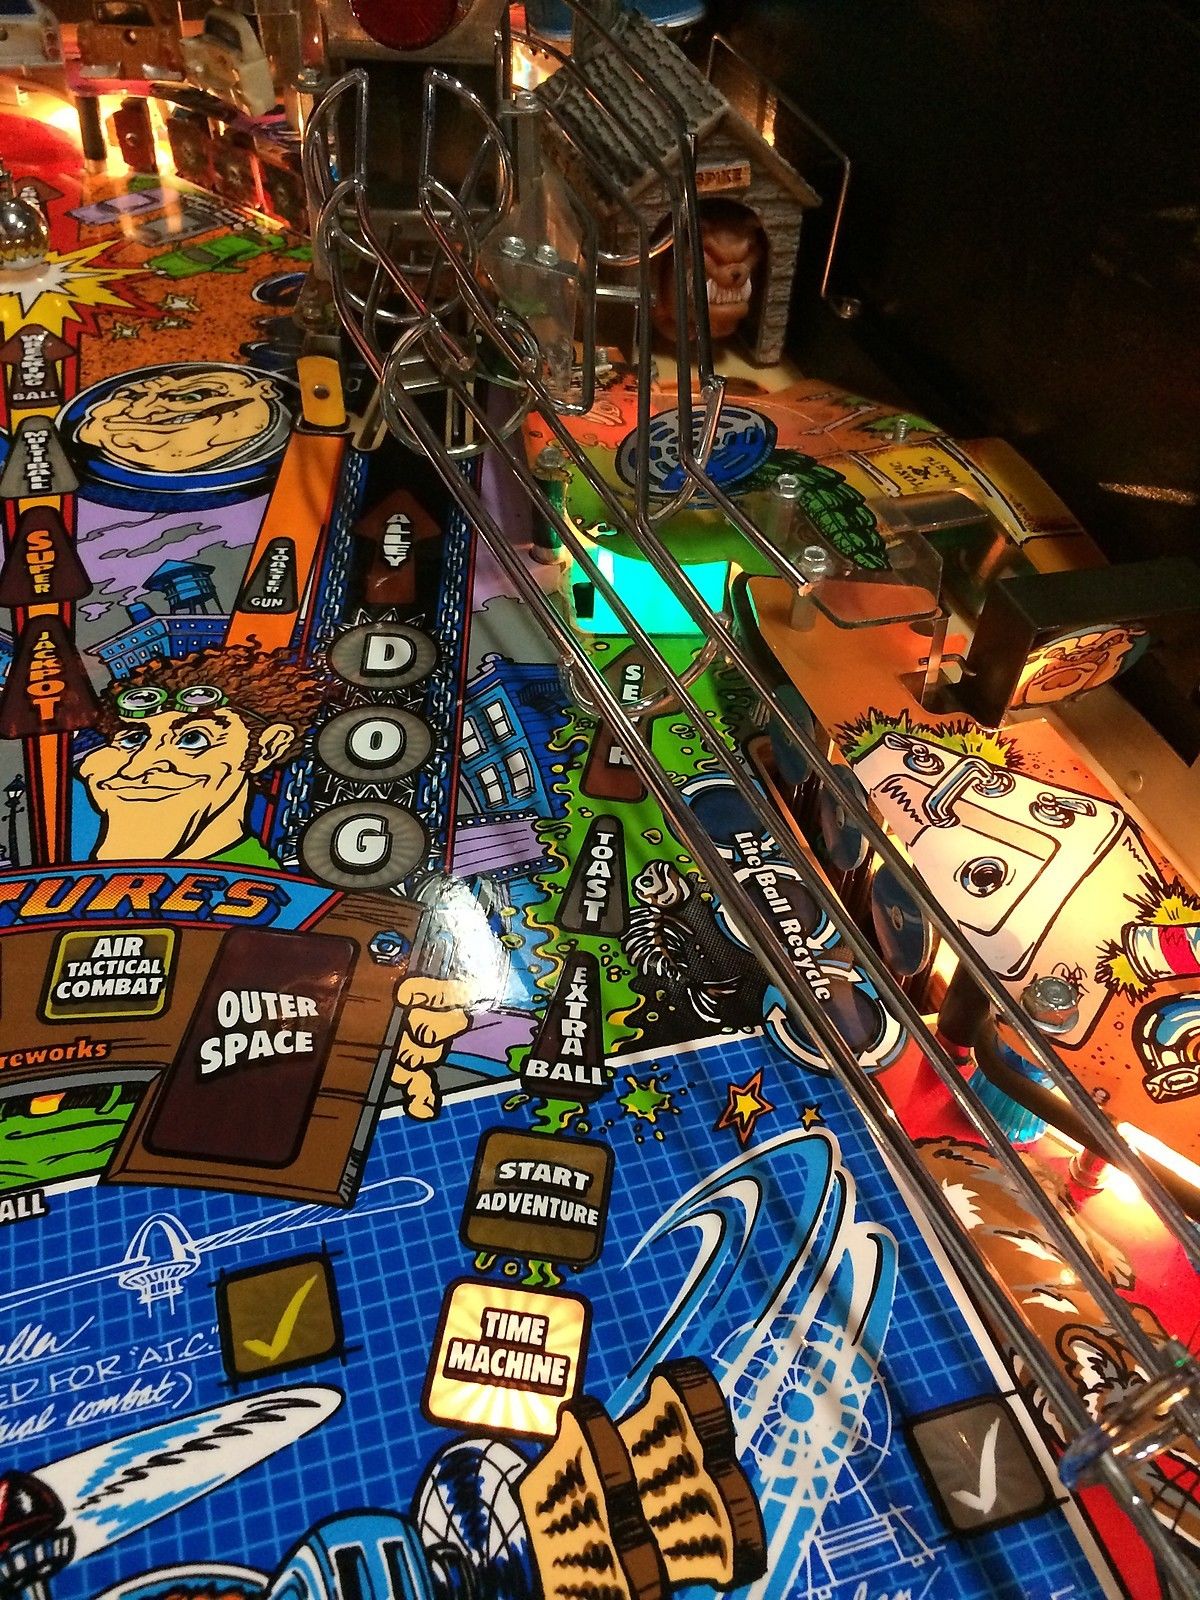 Sewer Light for Junkyard Pinball - Interactive with Game Play